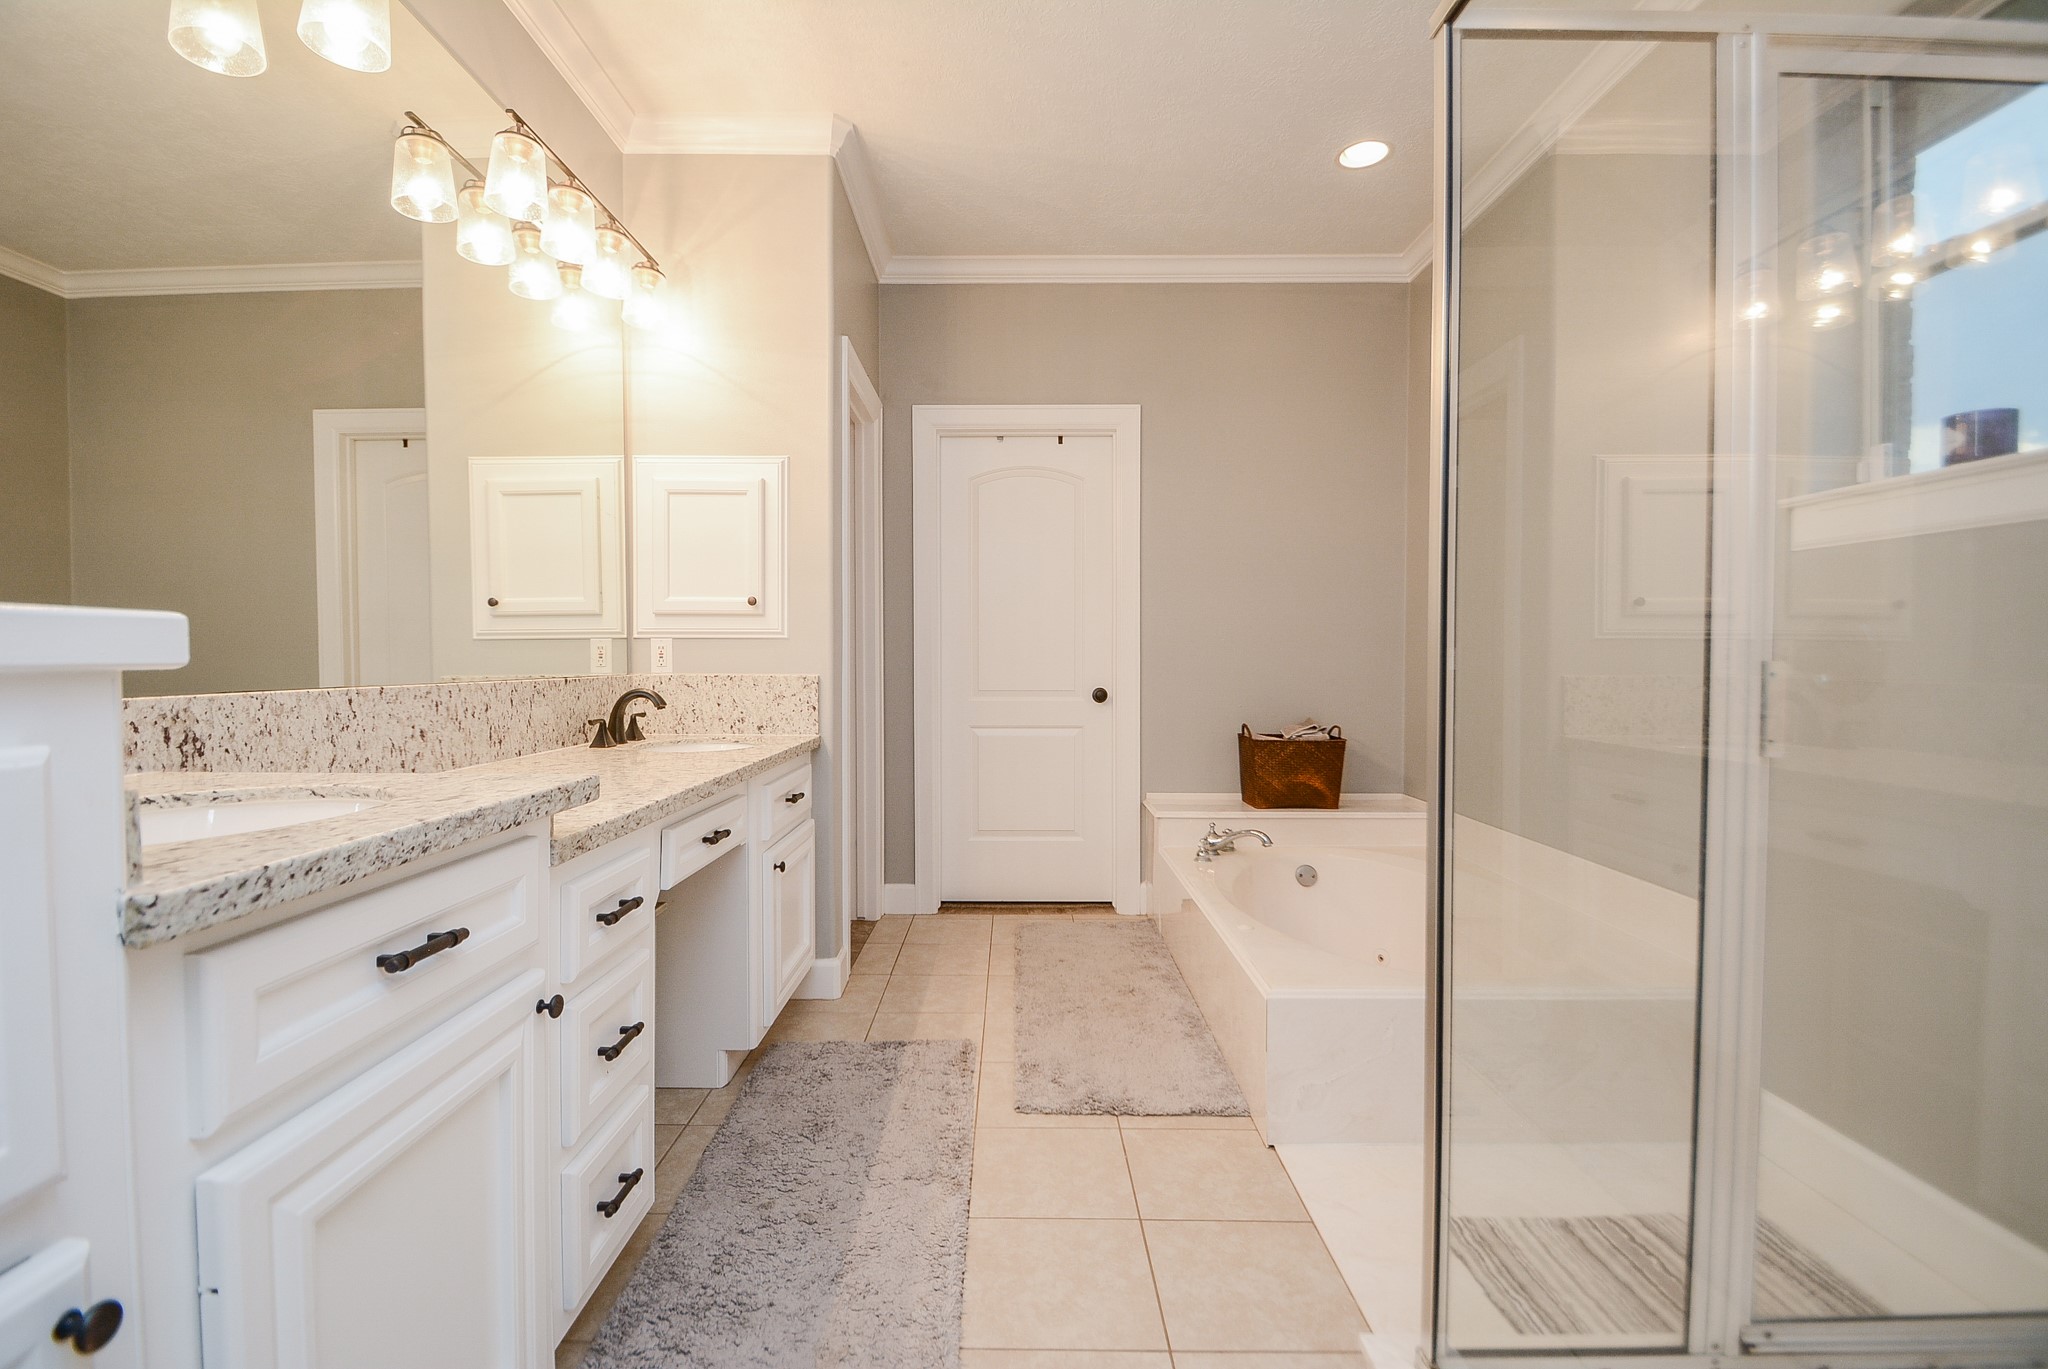 En-Suite Bath for the Primary Bedroom has Granite Countertops, Double Sinks, Whirlpool Bath, Separate Shower, Toilet Room, Large Walk-In Closet, and Linen Storage.